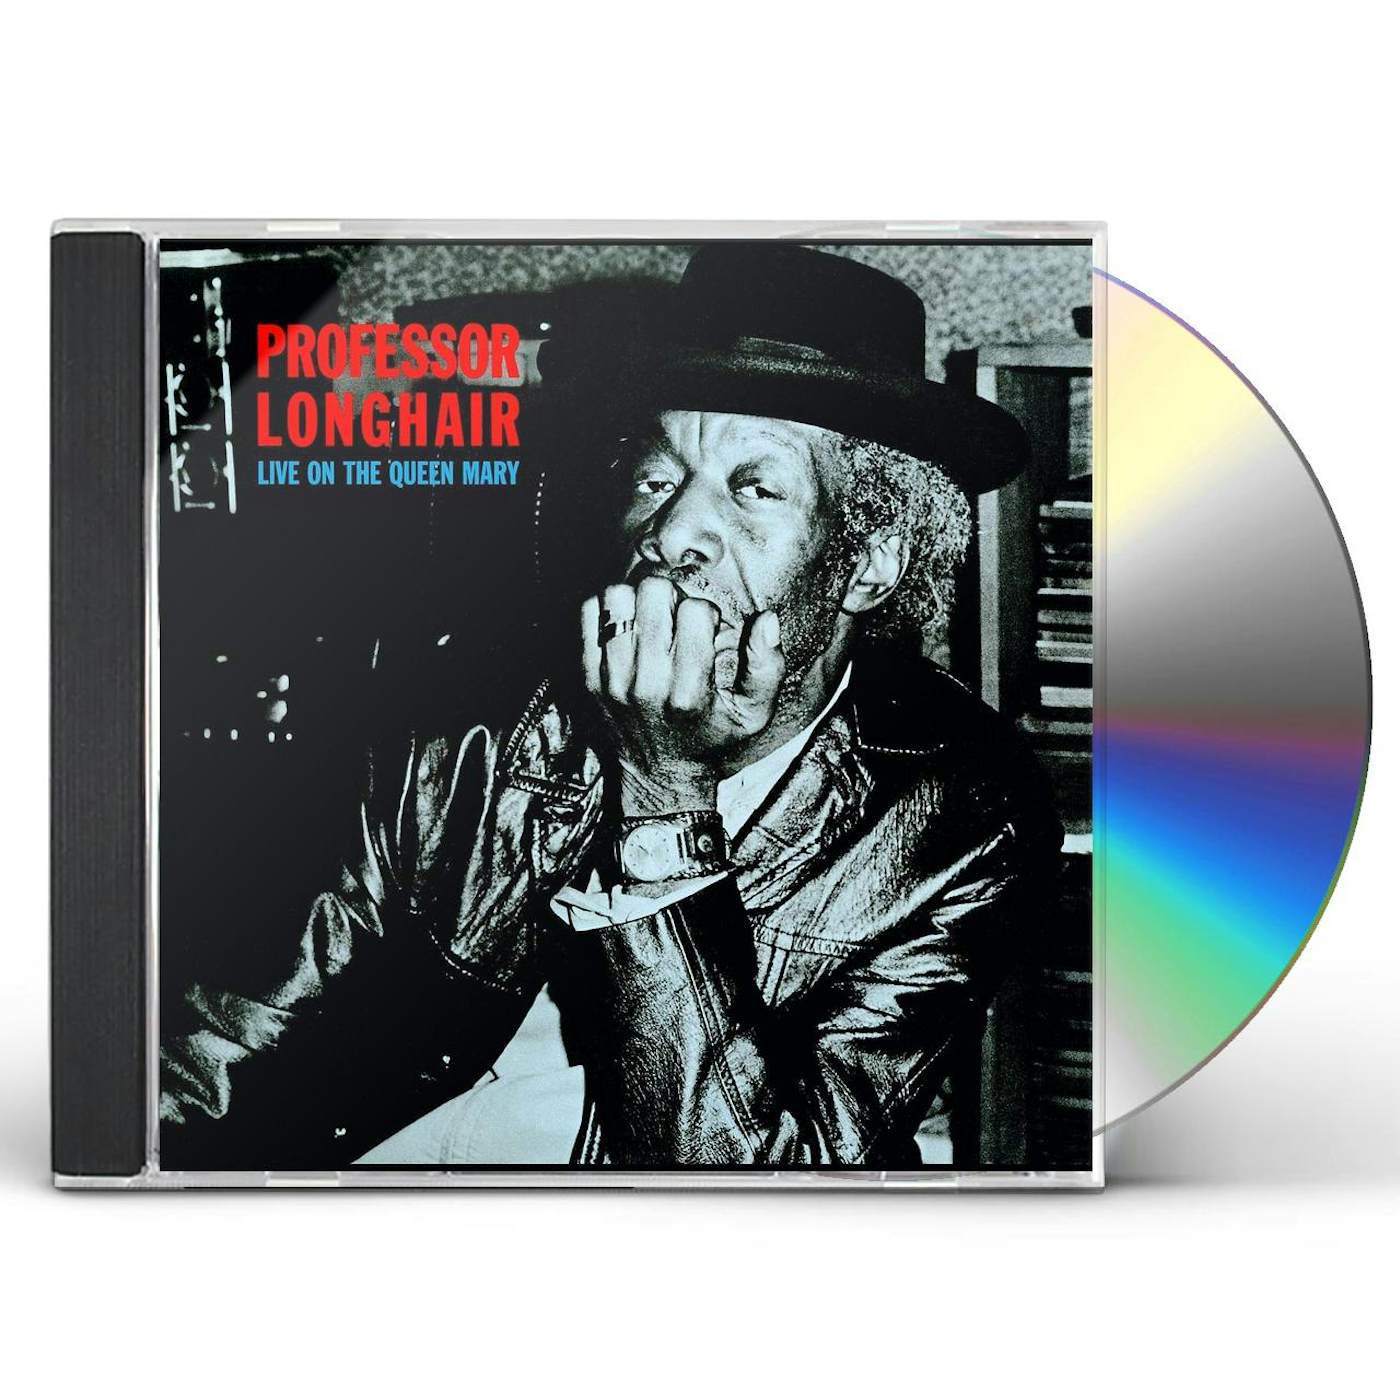 Professor Longhair LIVE ON THE QUEEN MARY CD